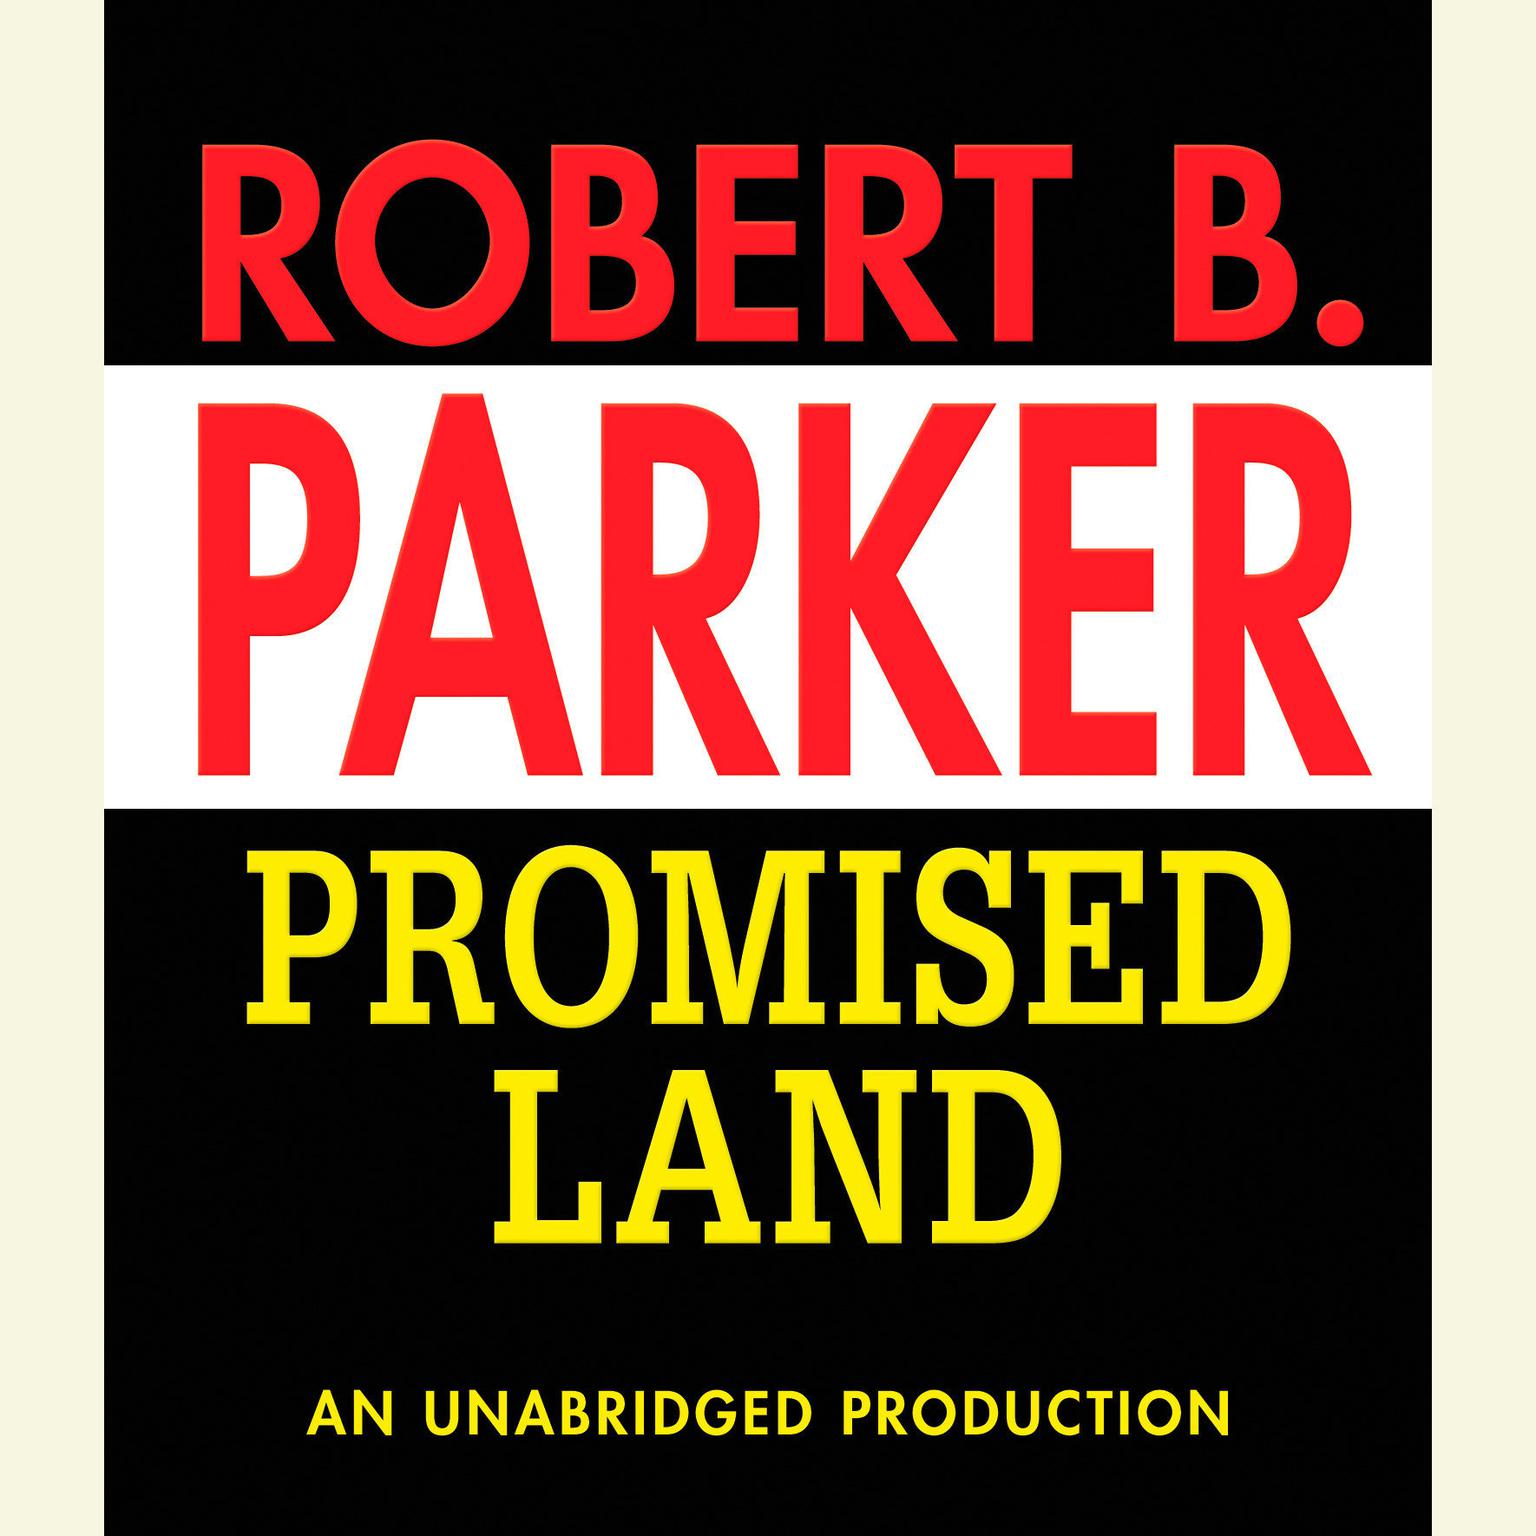 Promised Land Audiobook, by Robert B. Parker